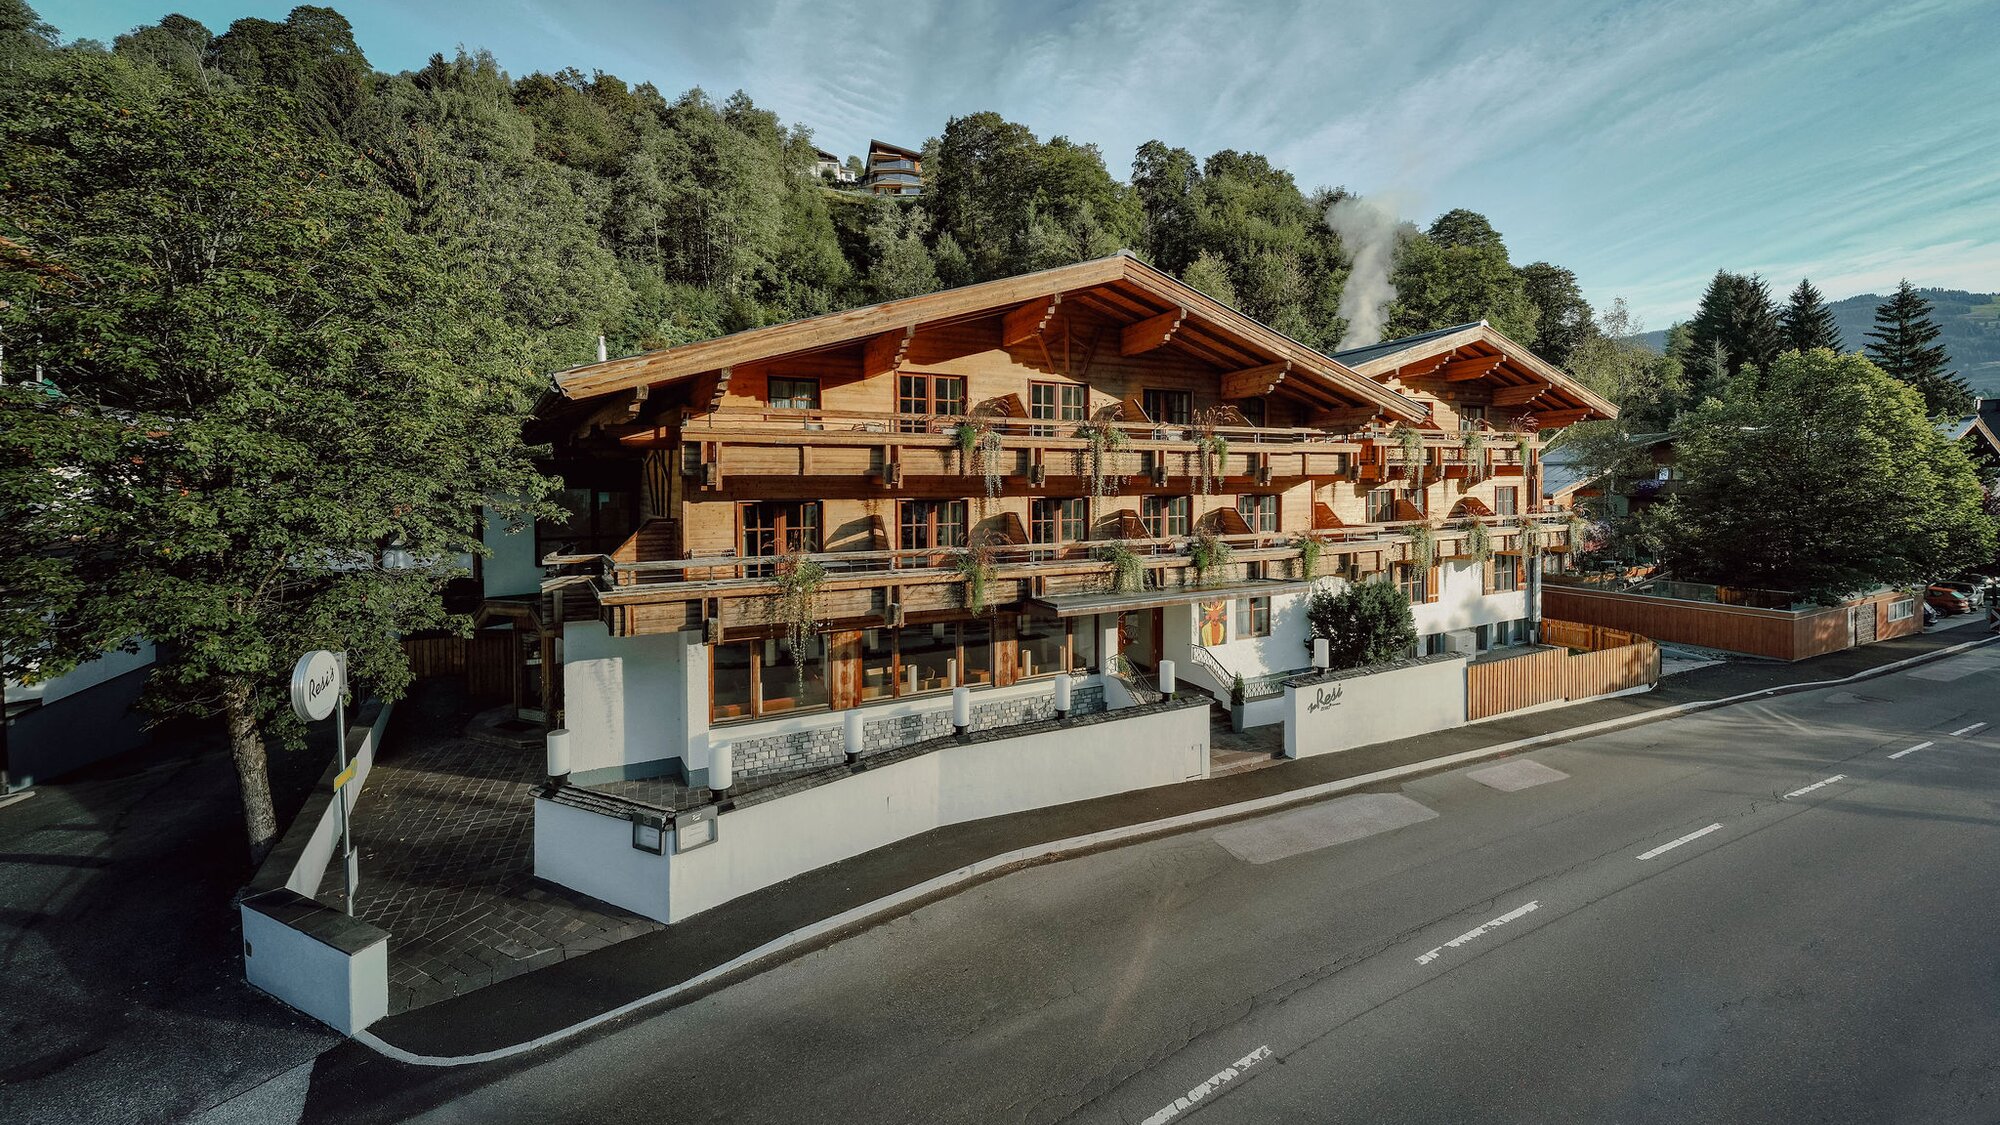 The Resi Saalbach Apartments in summer